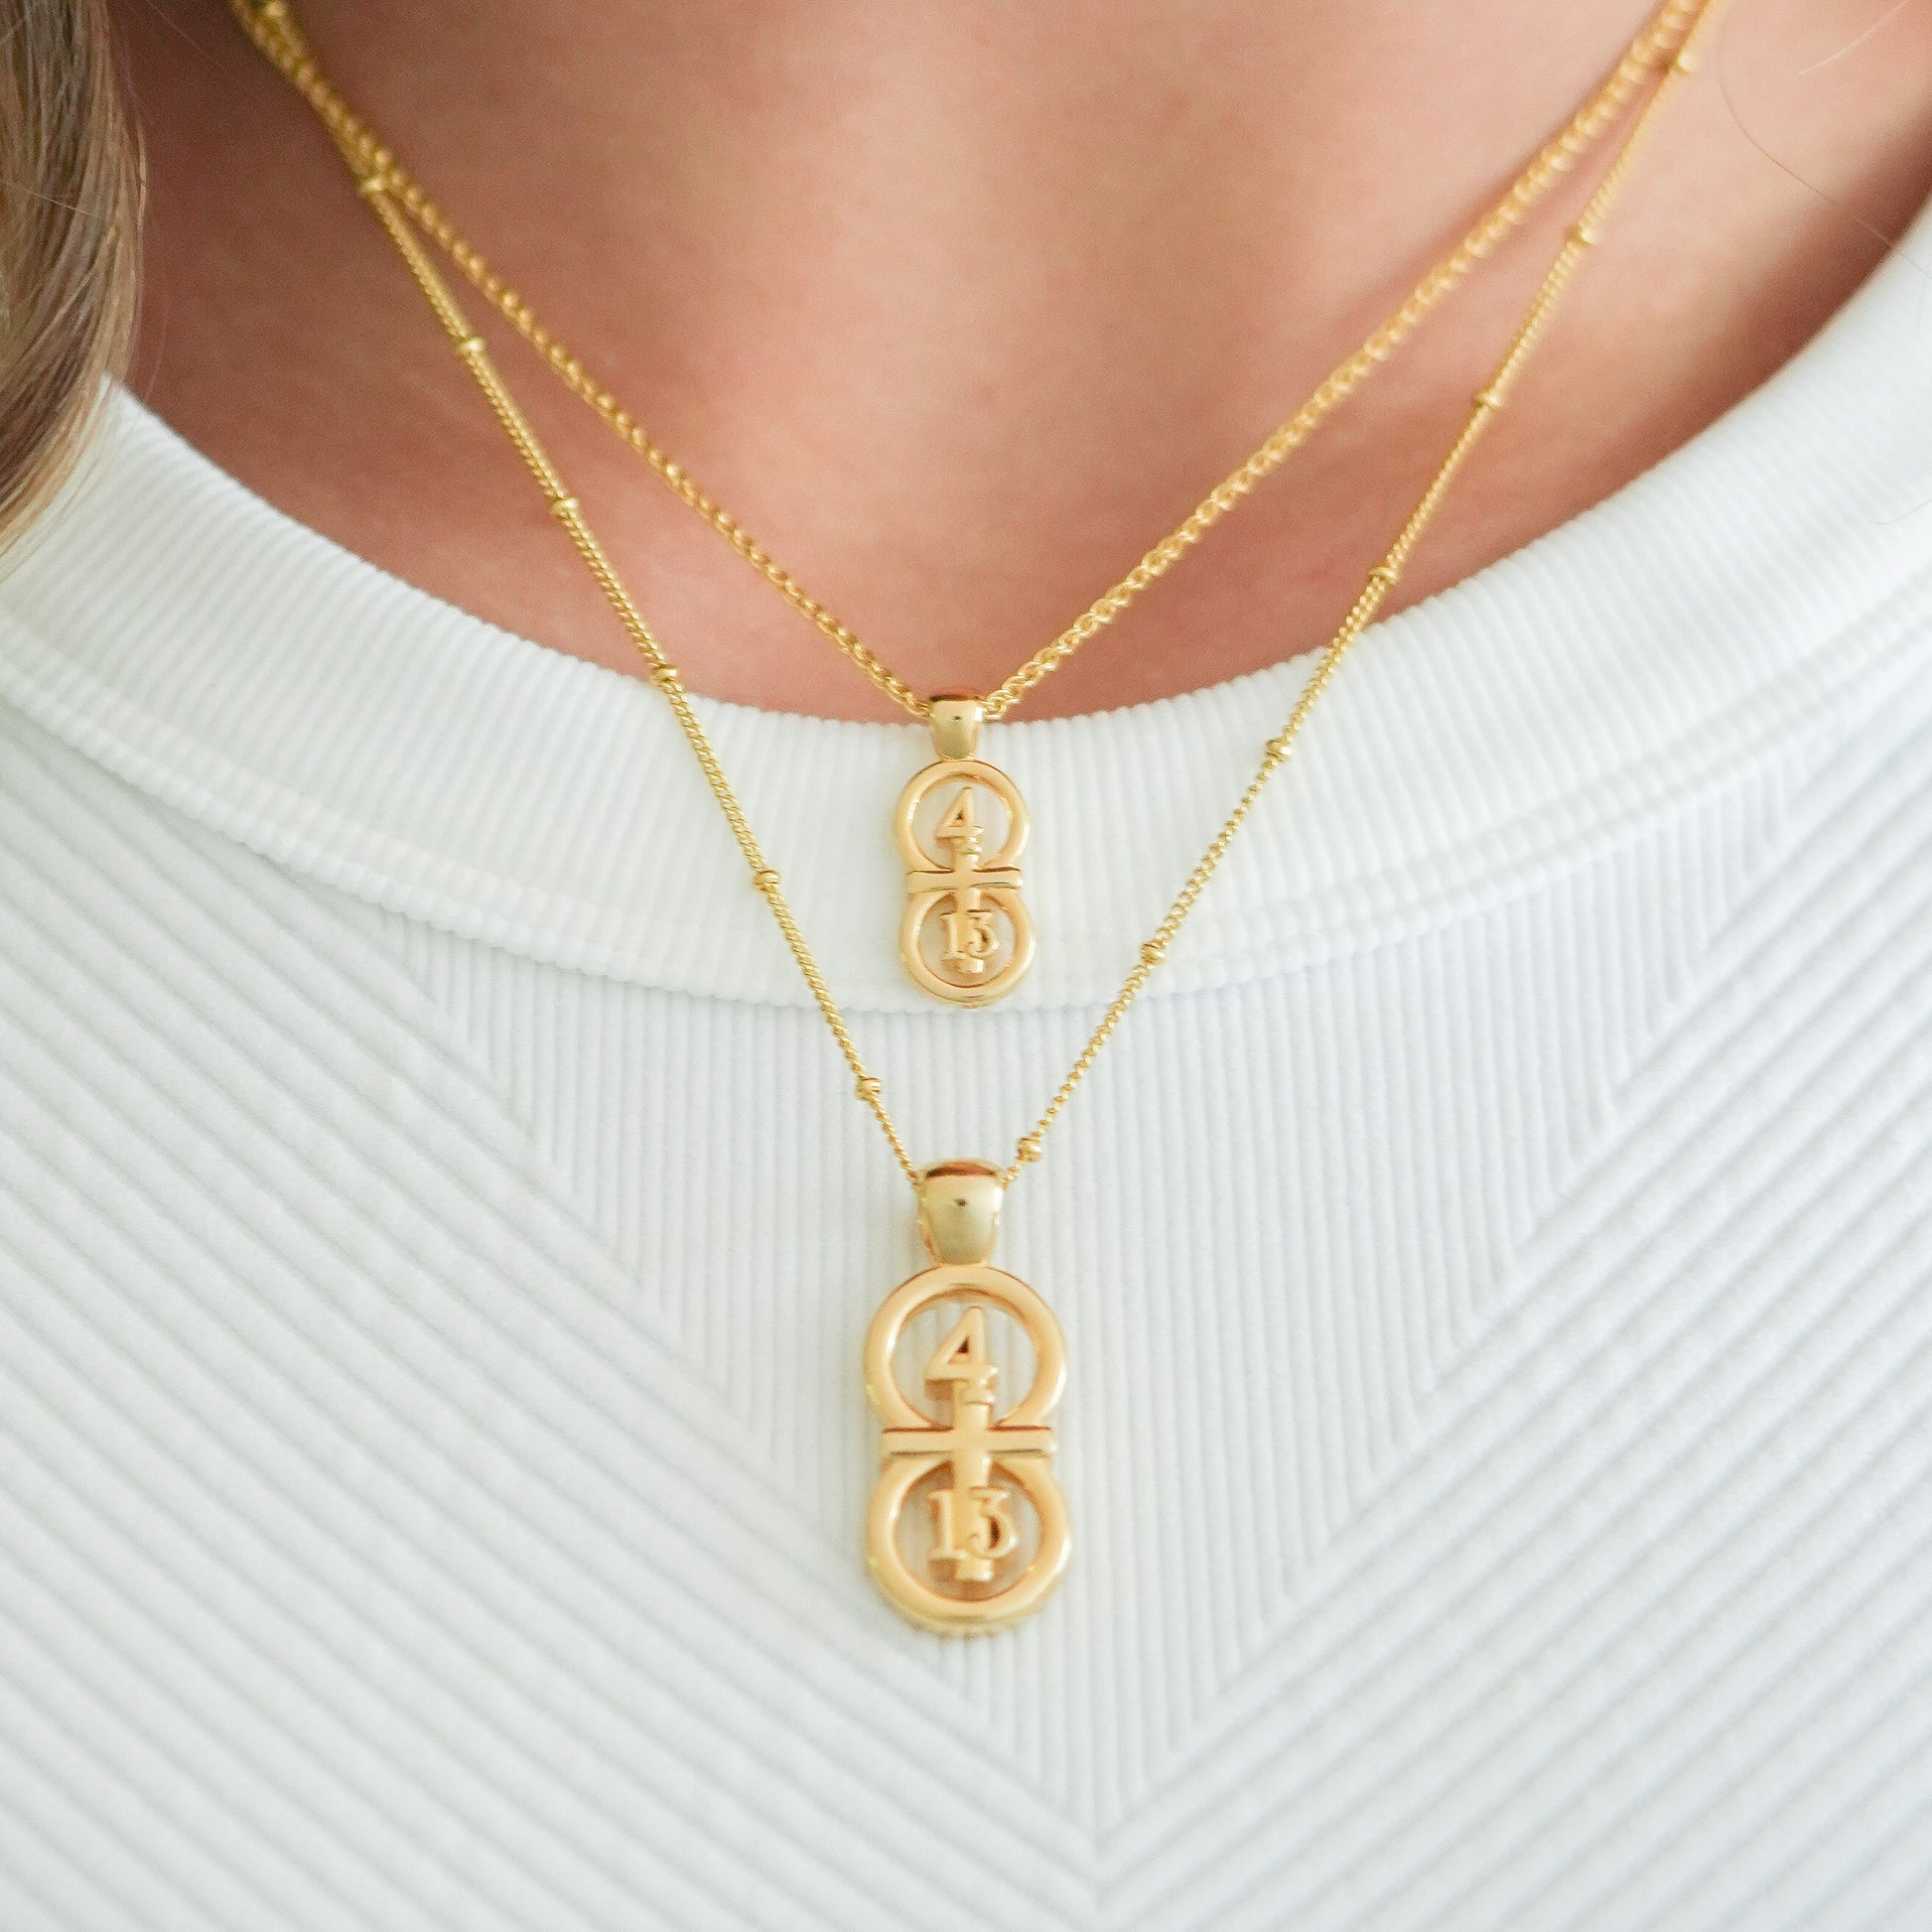 Gold small and large pendants displayed on neck with this wheat chain and satellite chain on the larger pendant.  Our 29 and 11® pendant has the numbers 4 and 13 intertwined with the cross to represent Philippians 4:13 with the chapter word "Philippians" inscribed on the back.